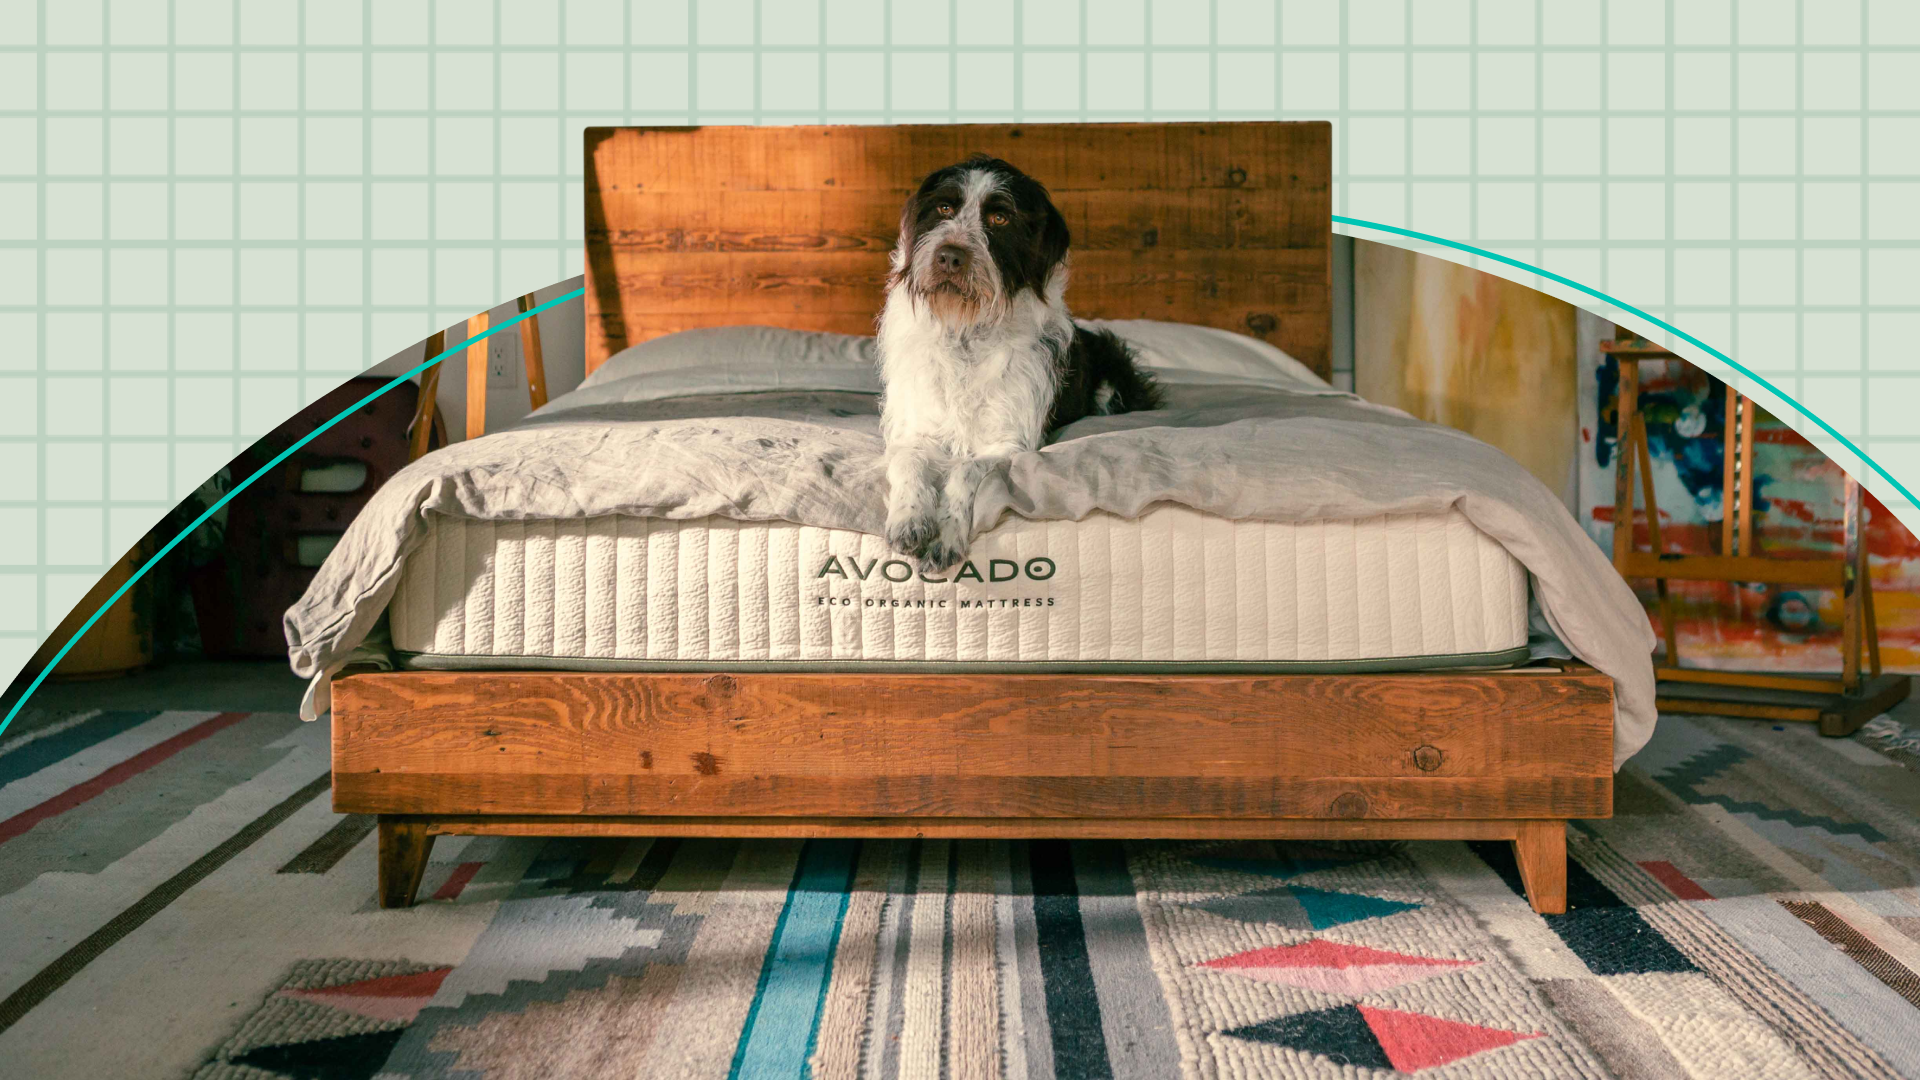 A large black and white dog lies on top of a comforter on a large bed with a wooden frame. There is a geometric-patterned, multicolor rug on the floor.